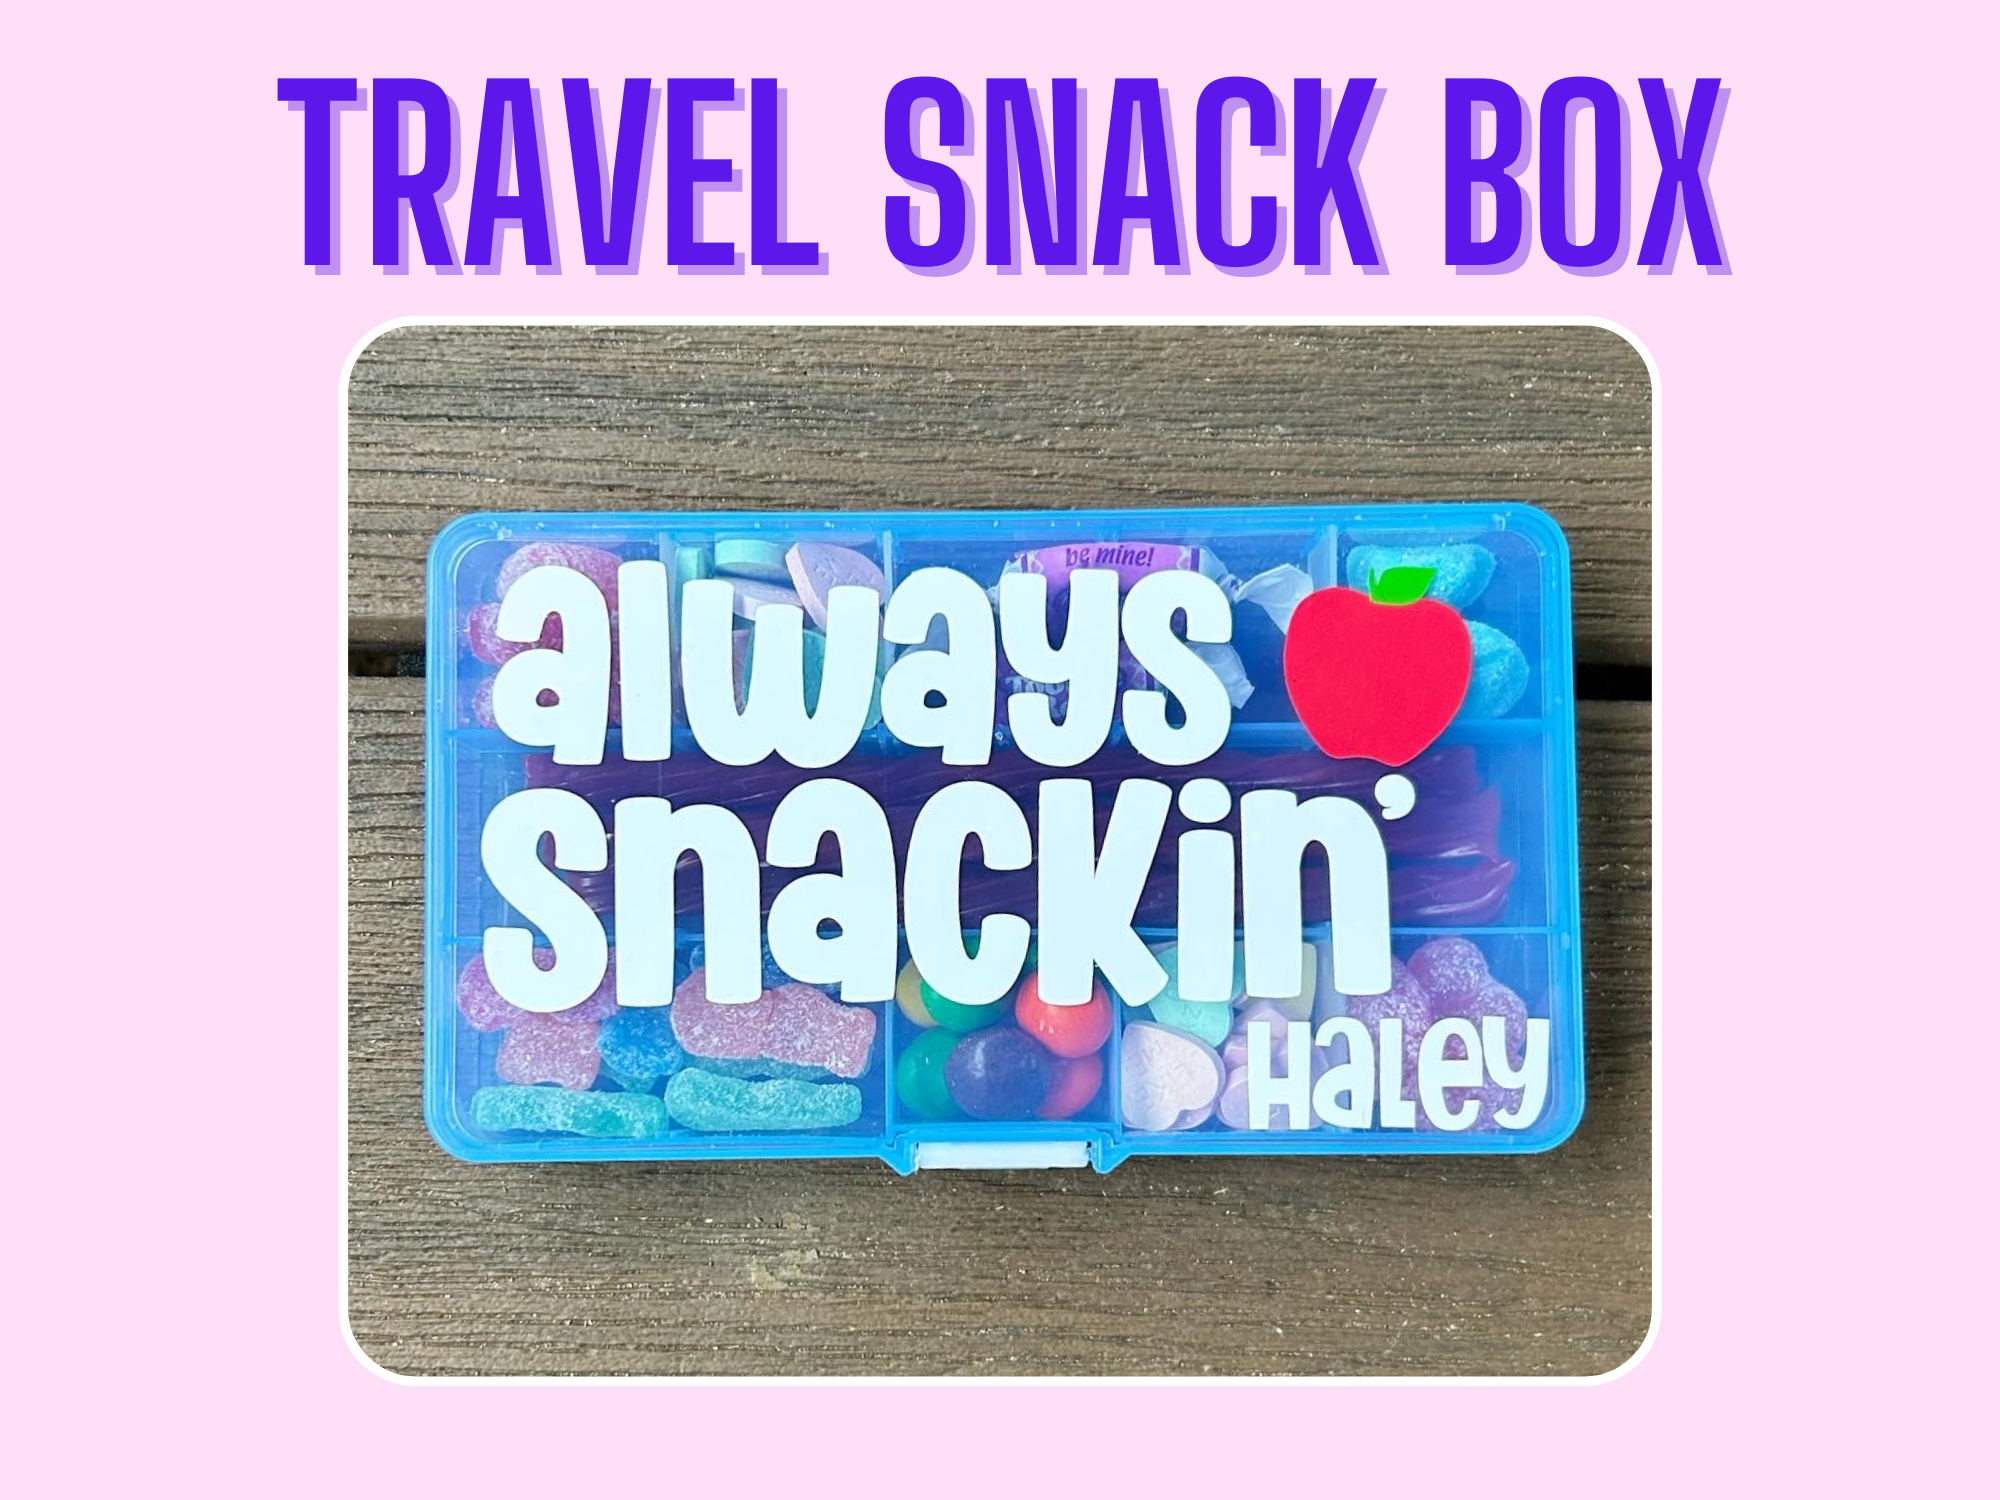 These snack boxes have saved the day more than once! 😍 #travel #trave